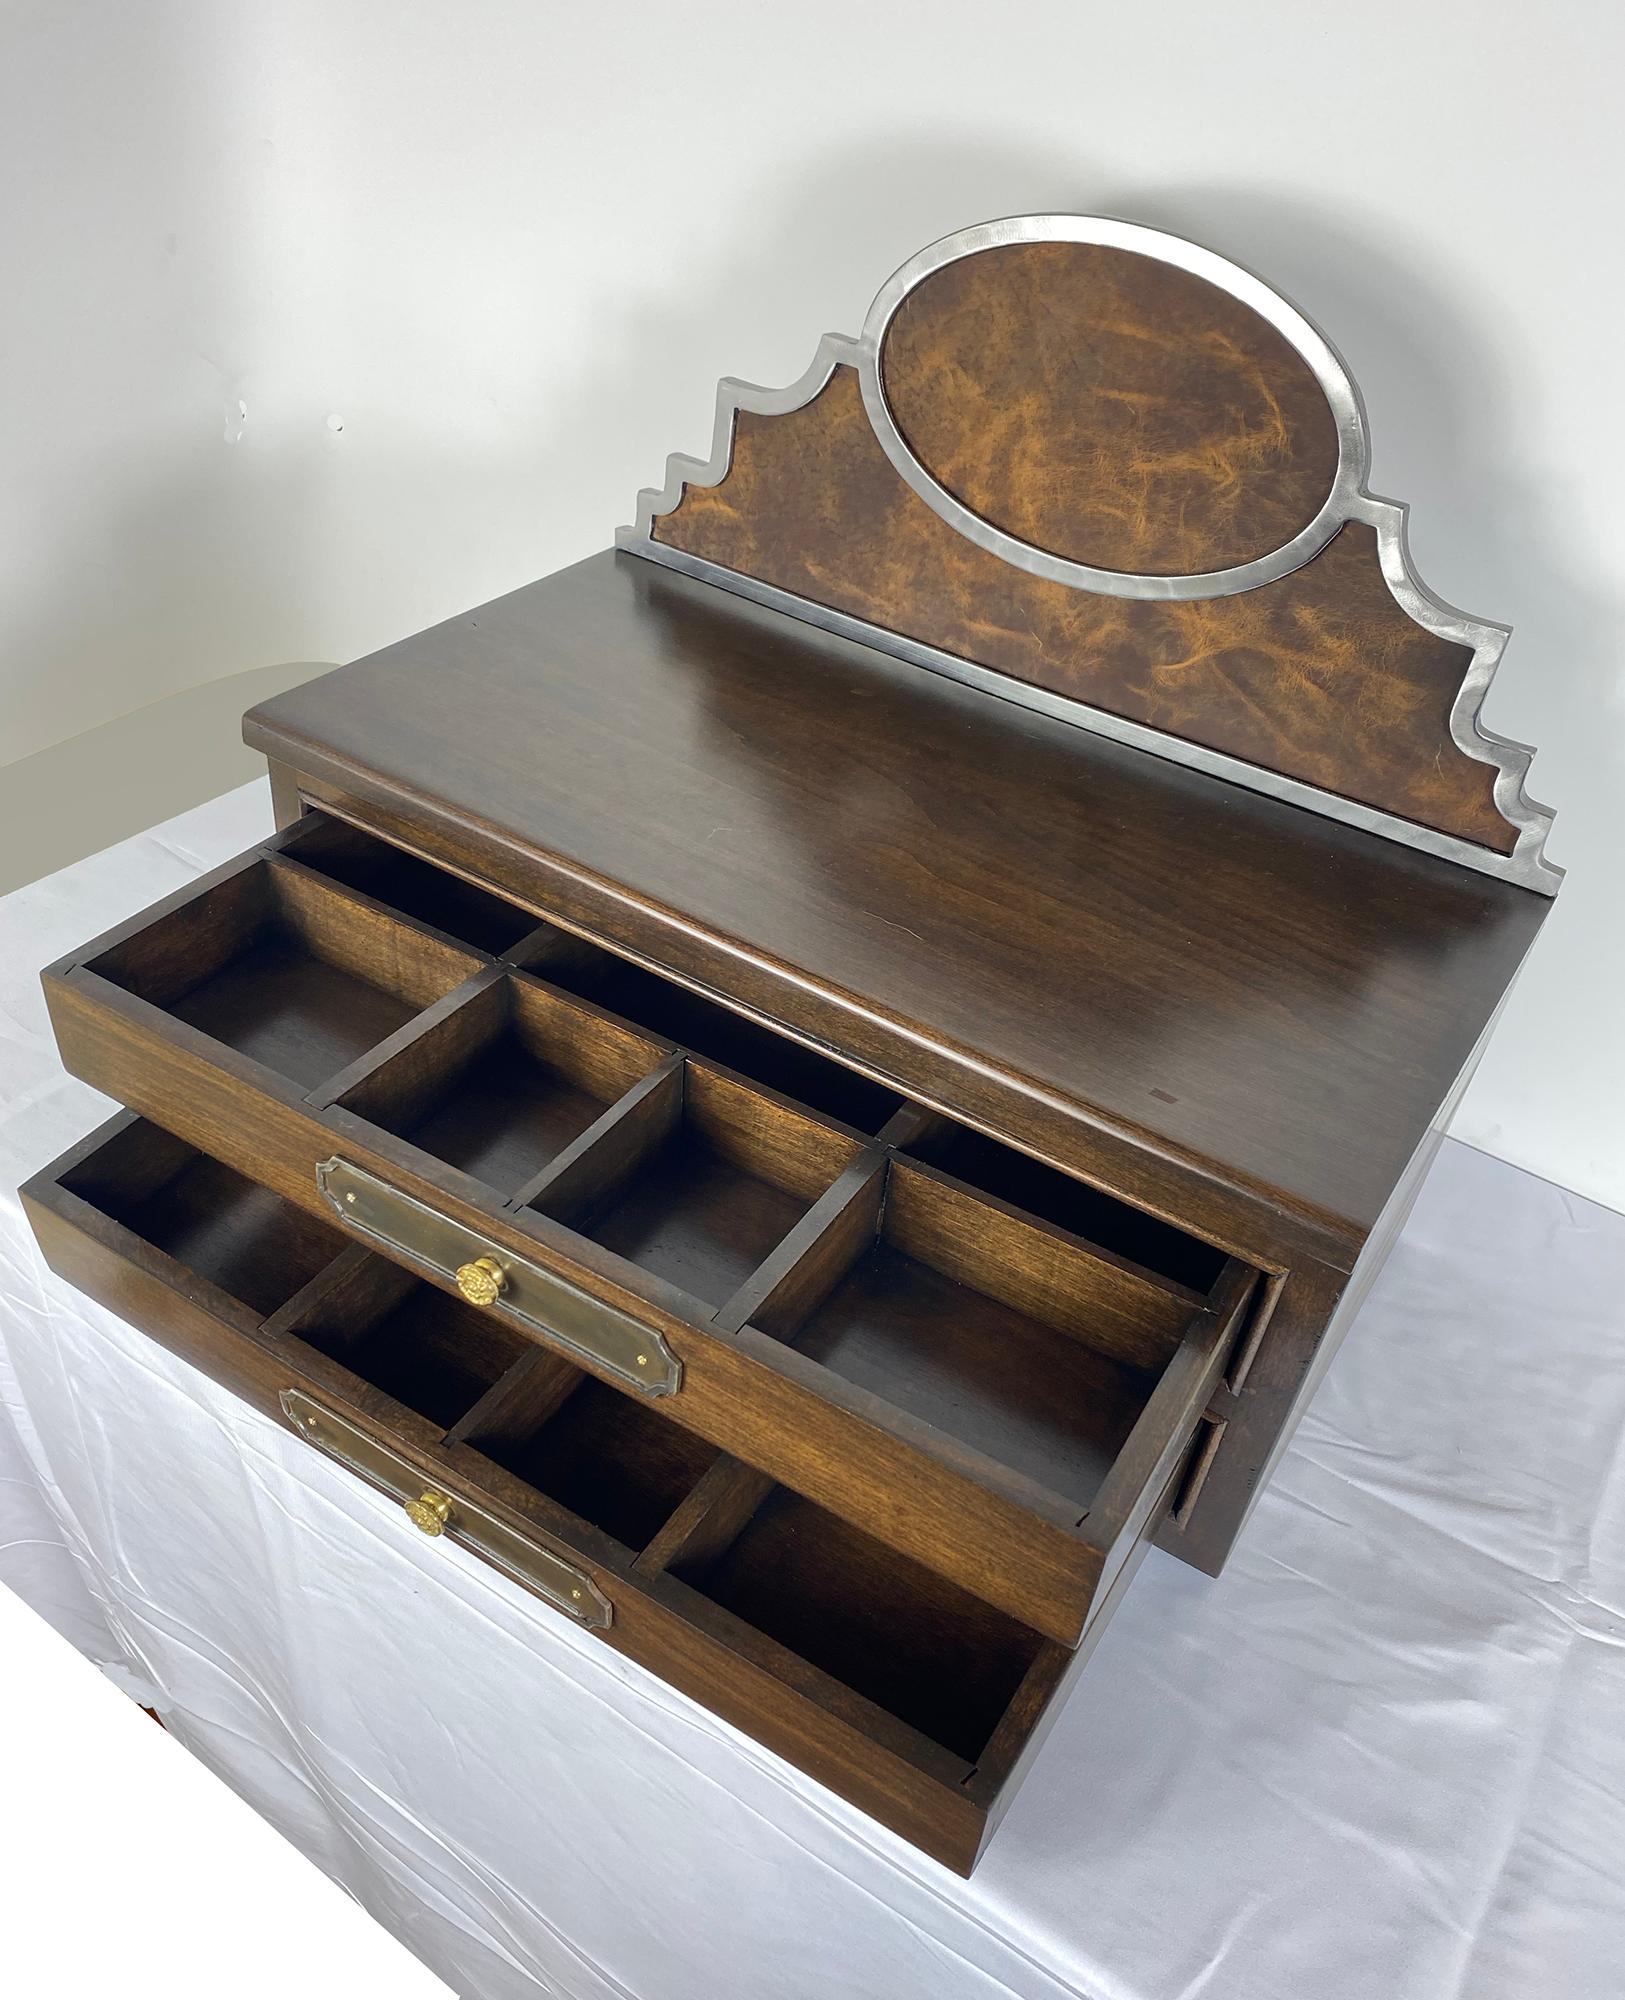 Polished steel trim surrounds  tumbled leather and solid wood to create an elegant rustic look.  A one of a kind gift that is sure to get that special someones attention.  More than just a jewelry box, but a legacy item that will be welcomed by